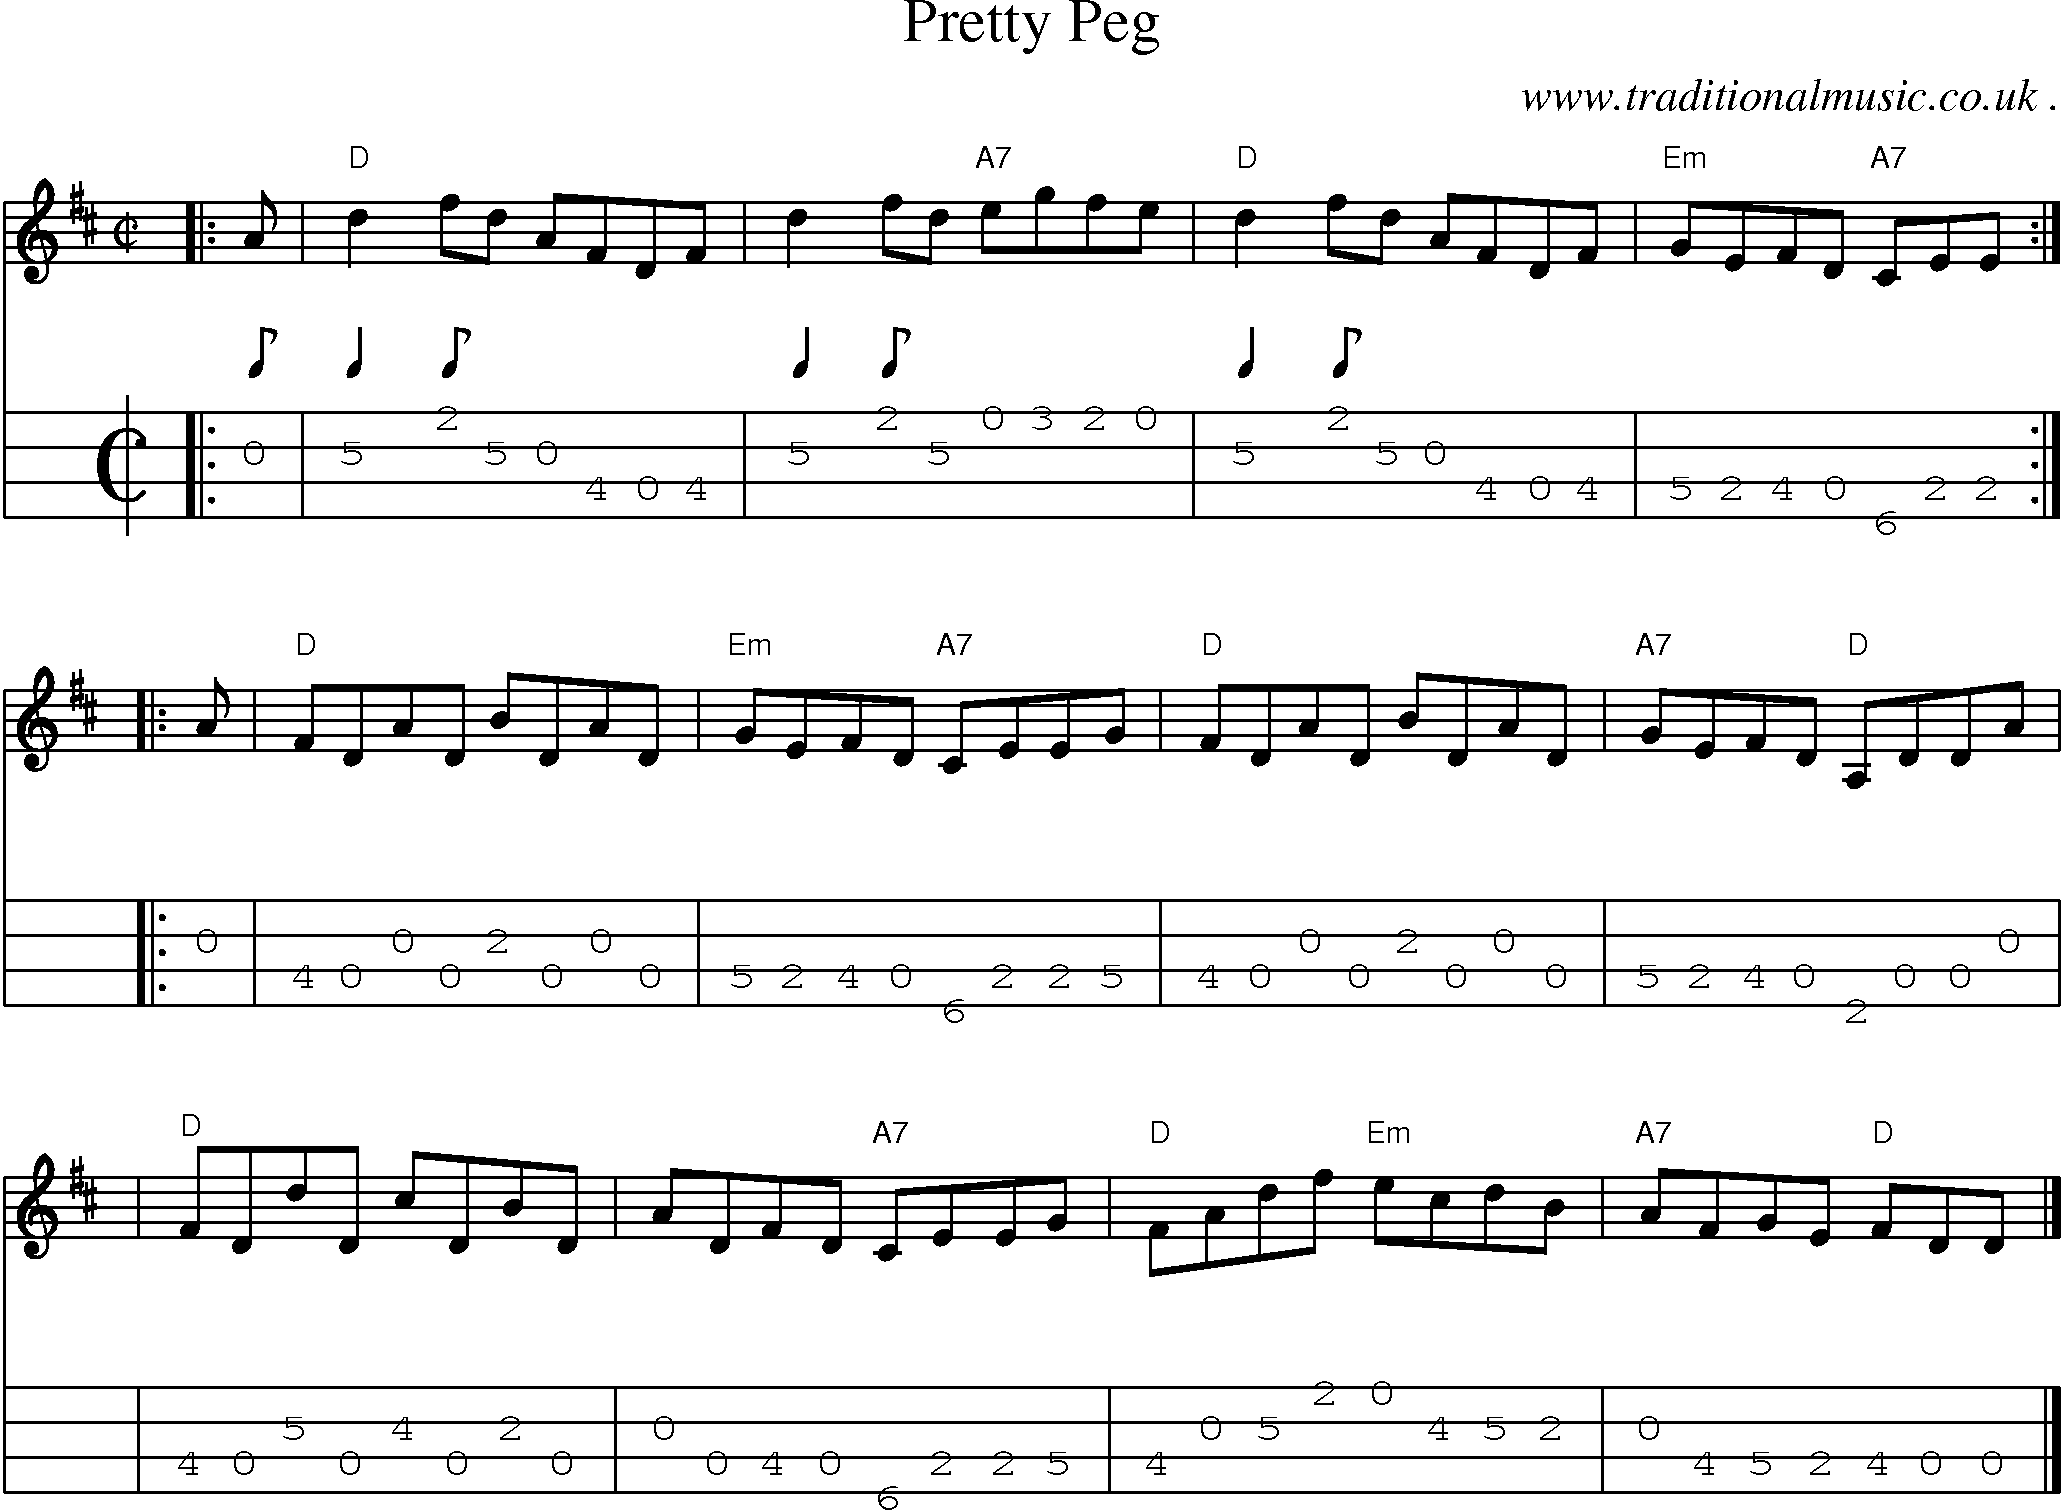 Sheet-music  score, Chords and Mandolin Tabs for Pretty Peg